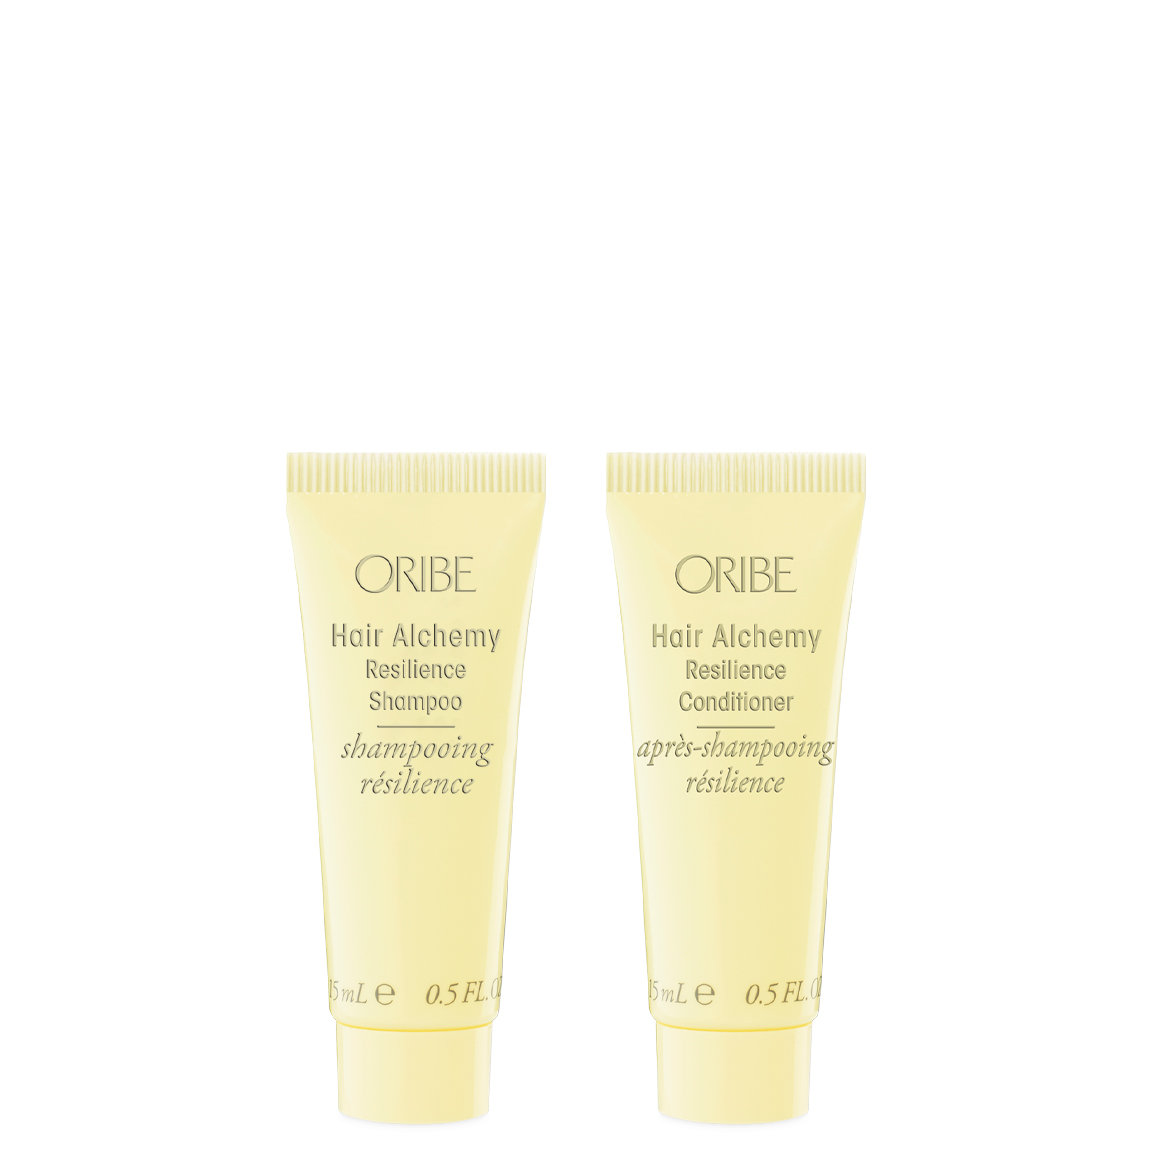 Free gift with qualifying Oribe purchase